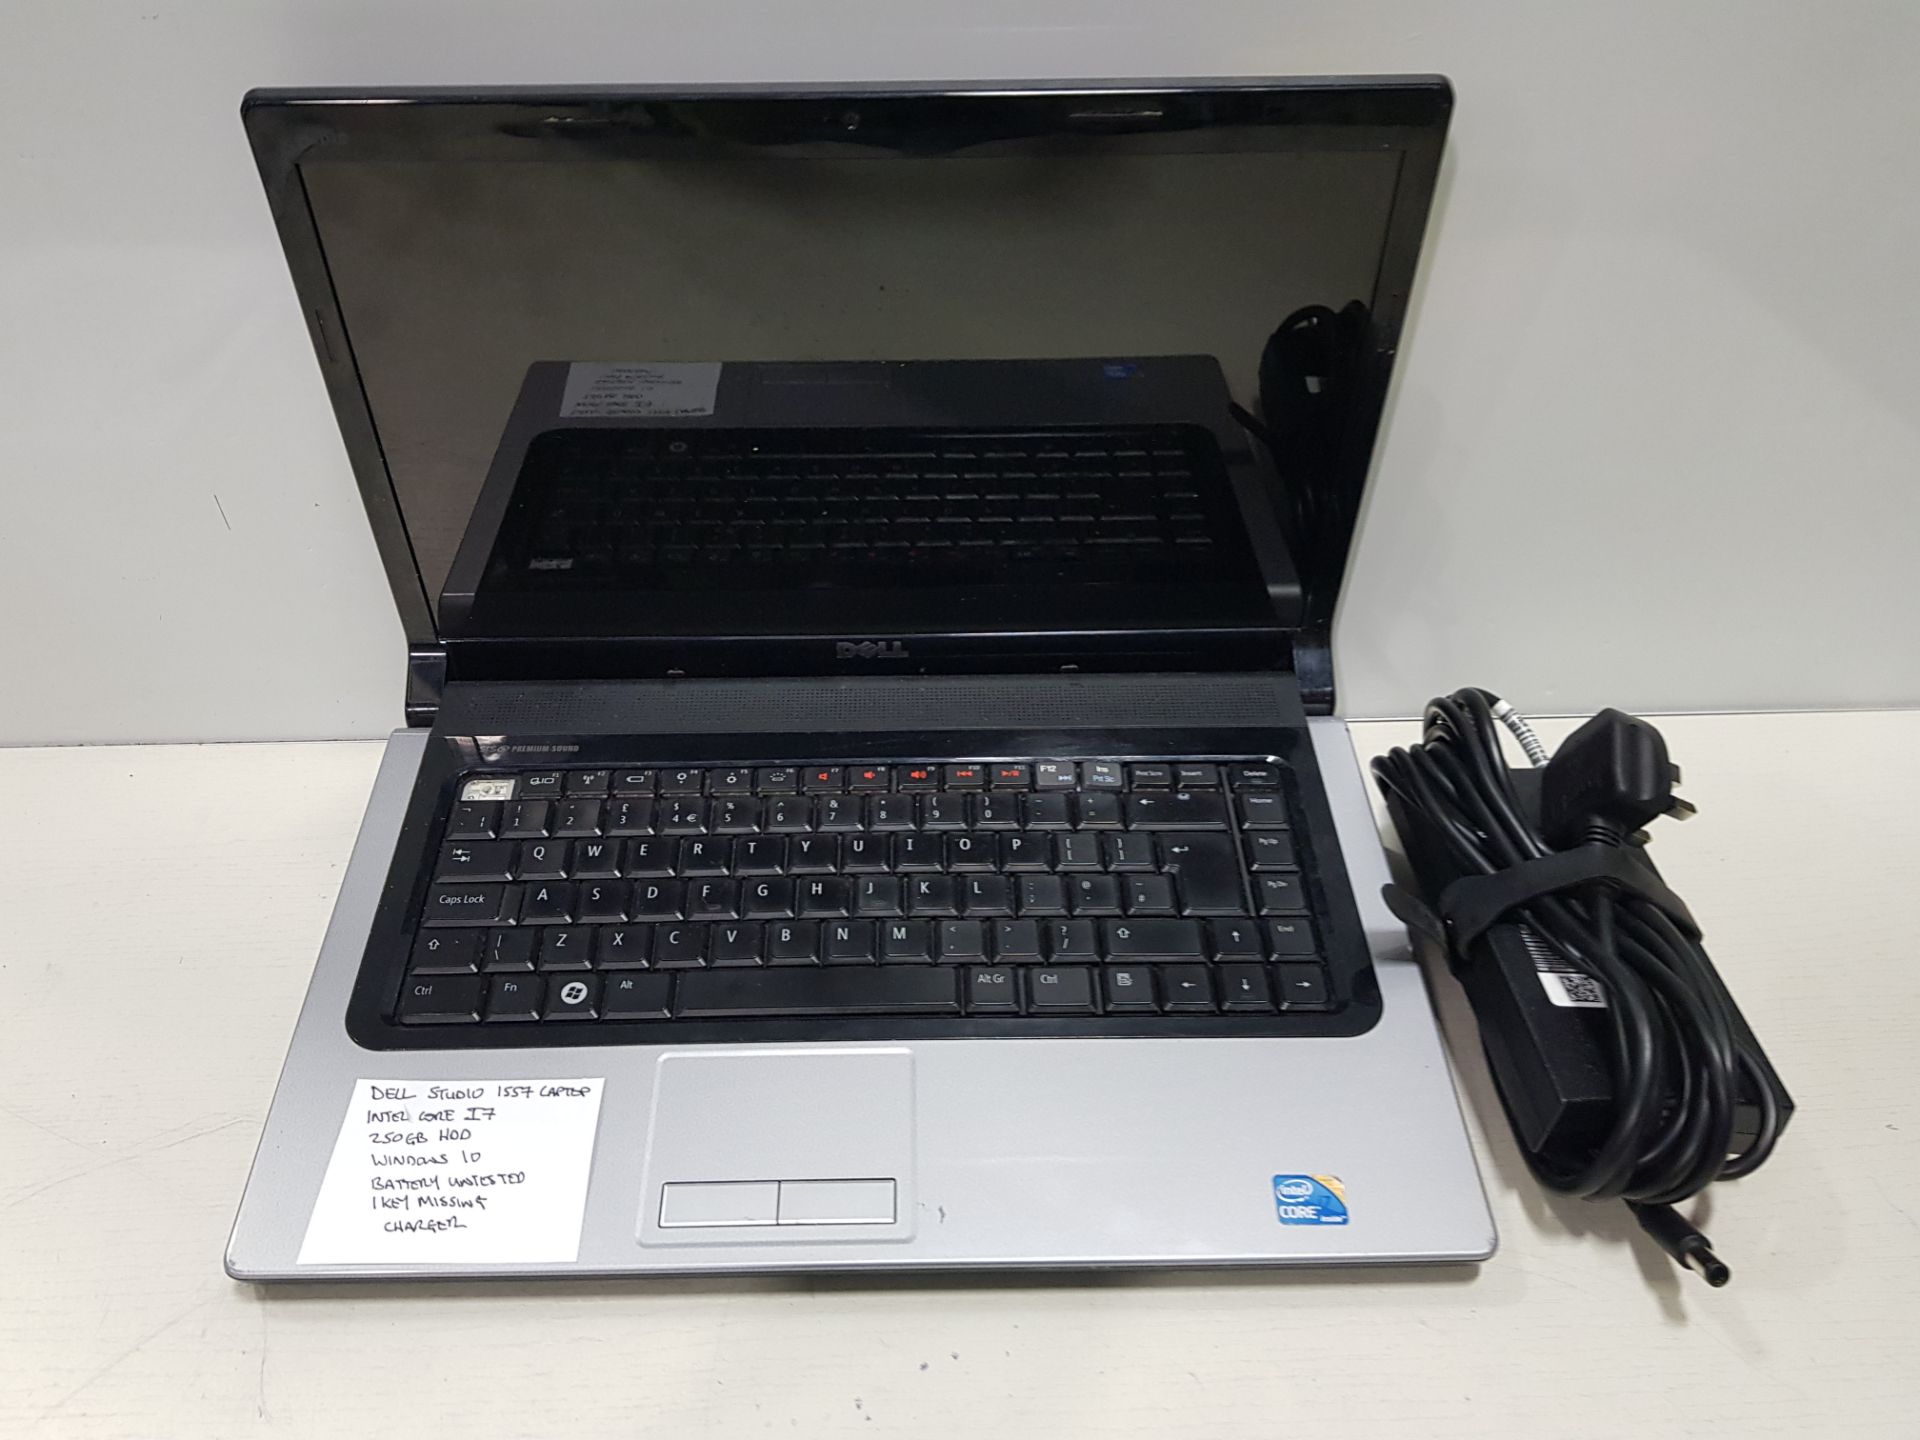 DELL STUDID 1557 LAPTOP INTEL CORE I7 250GB HDD WINDOWS 10 BATTERY UNTESTED 1 KEY MISSING , CHARGER